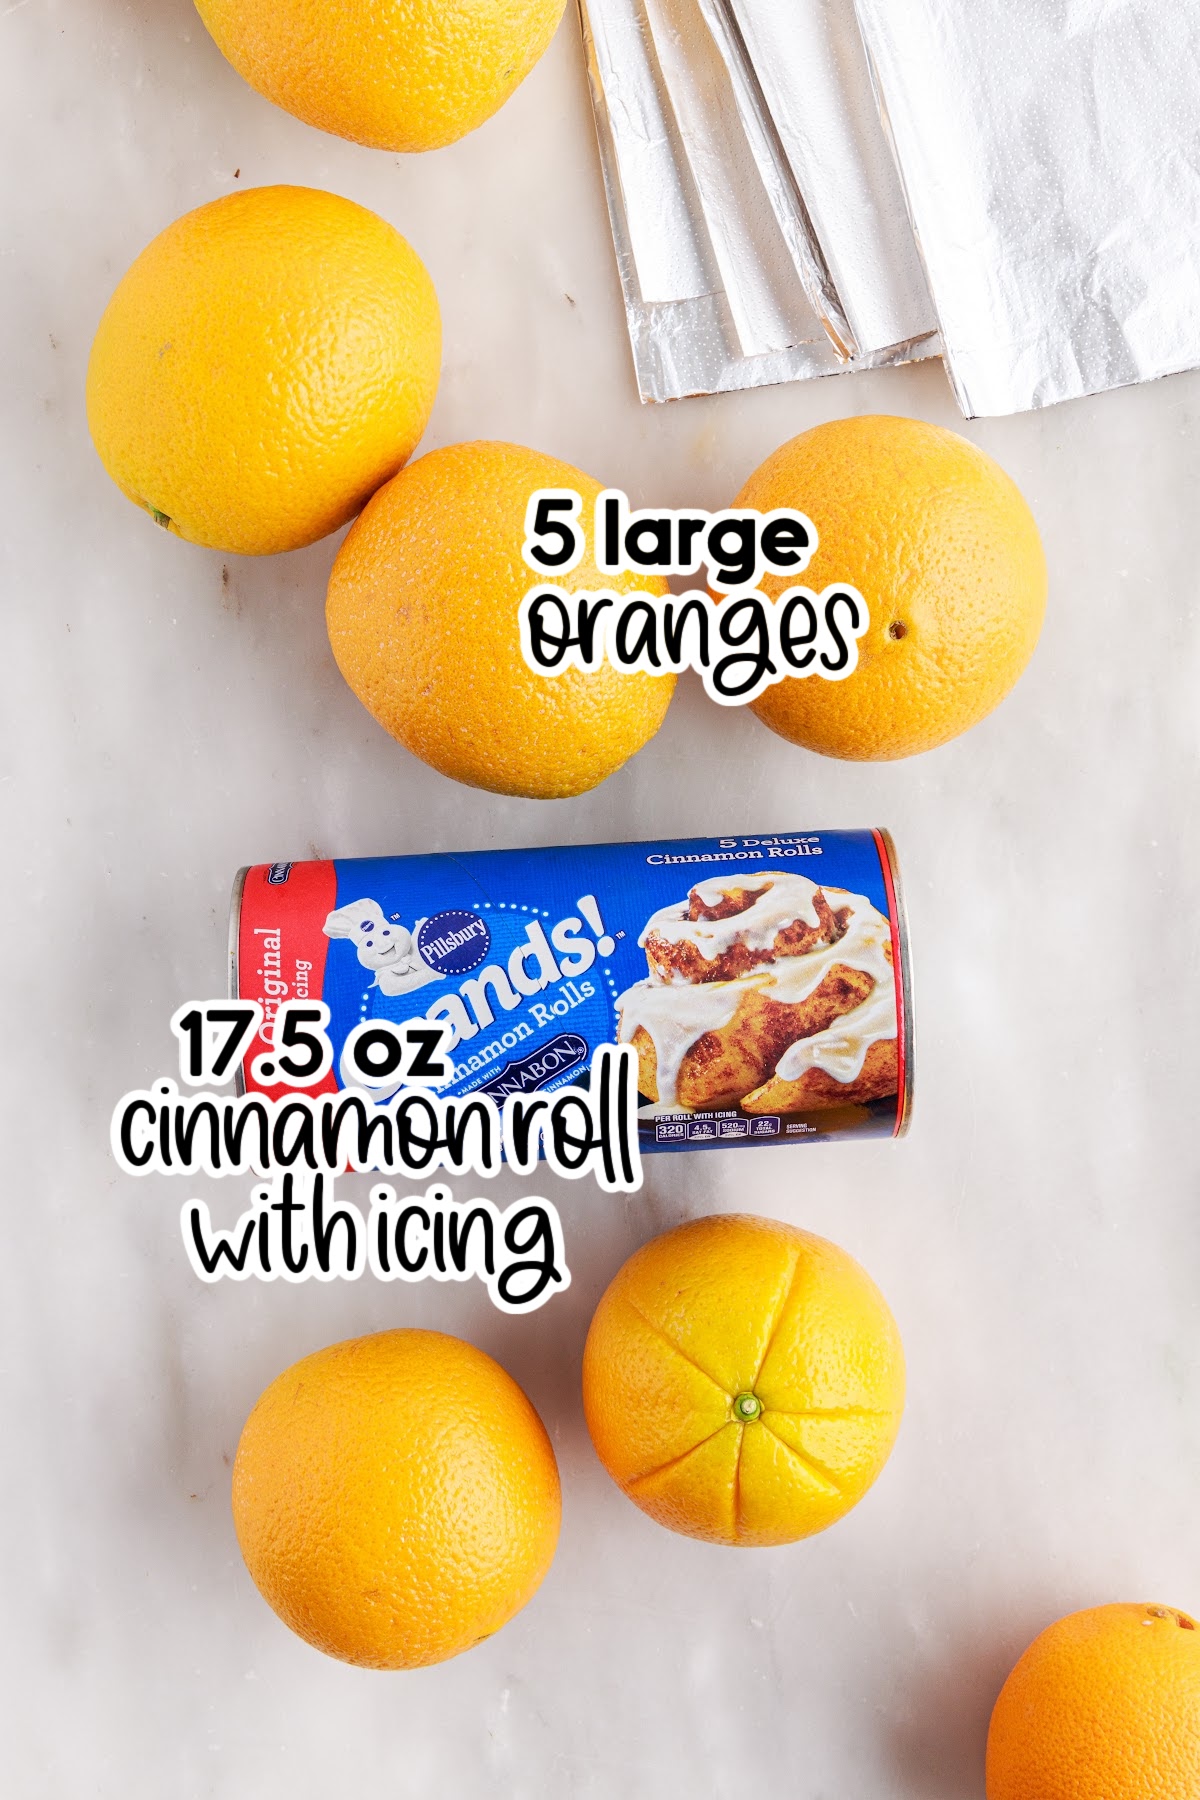 Individual ingredients for campfire cinnamon rolls - oranges and package of cinnamon rolls - with text labels.